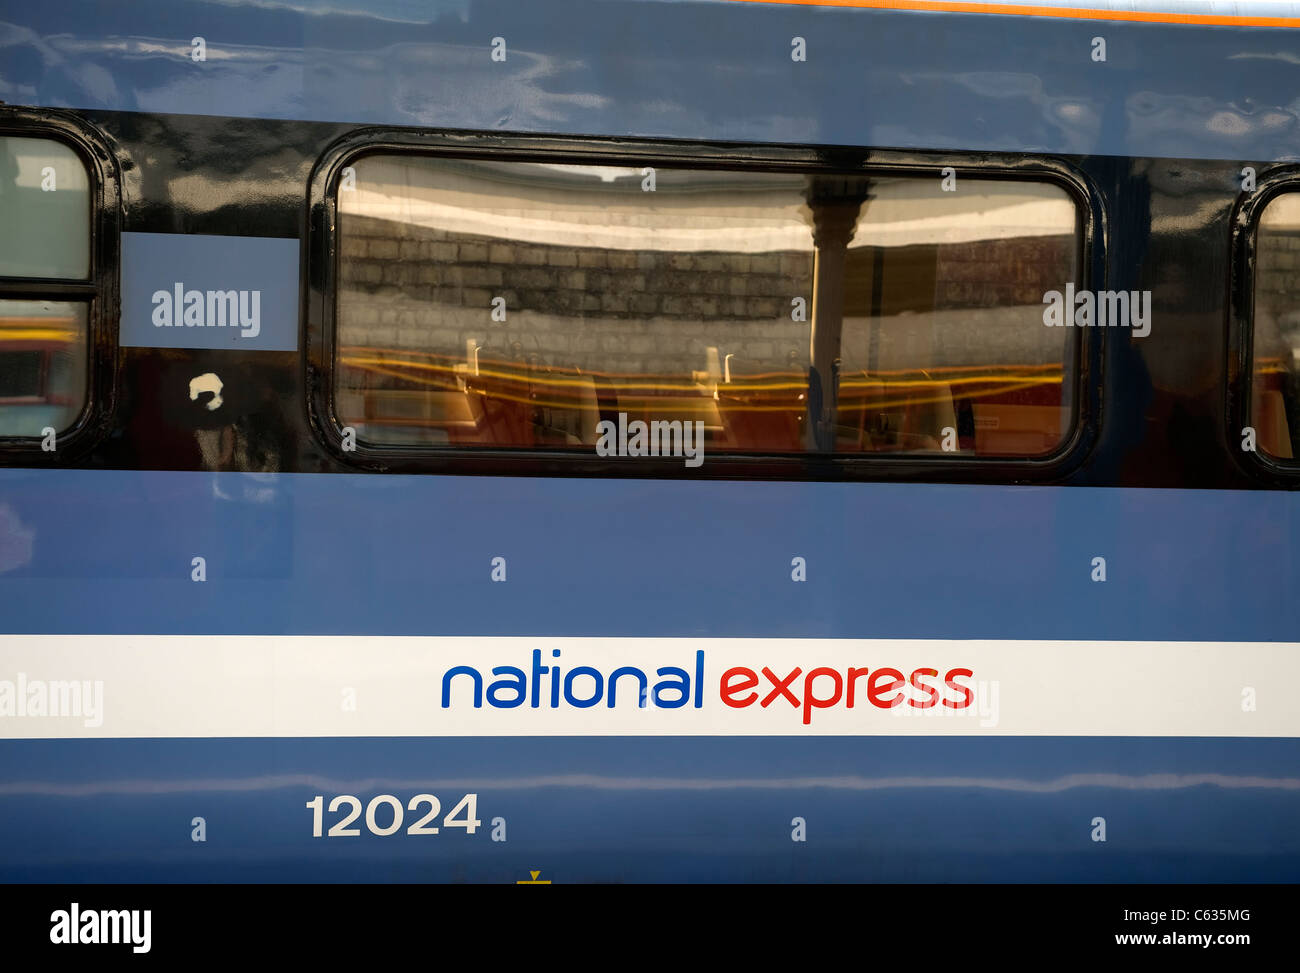 Side View of a National Express Railway Carriage showing the company logo Stock Photo